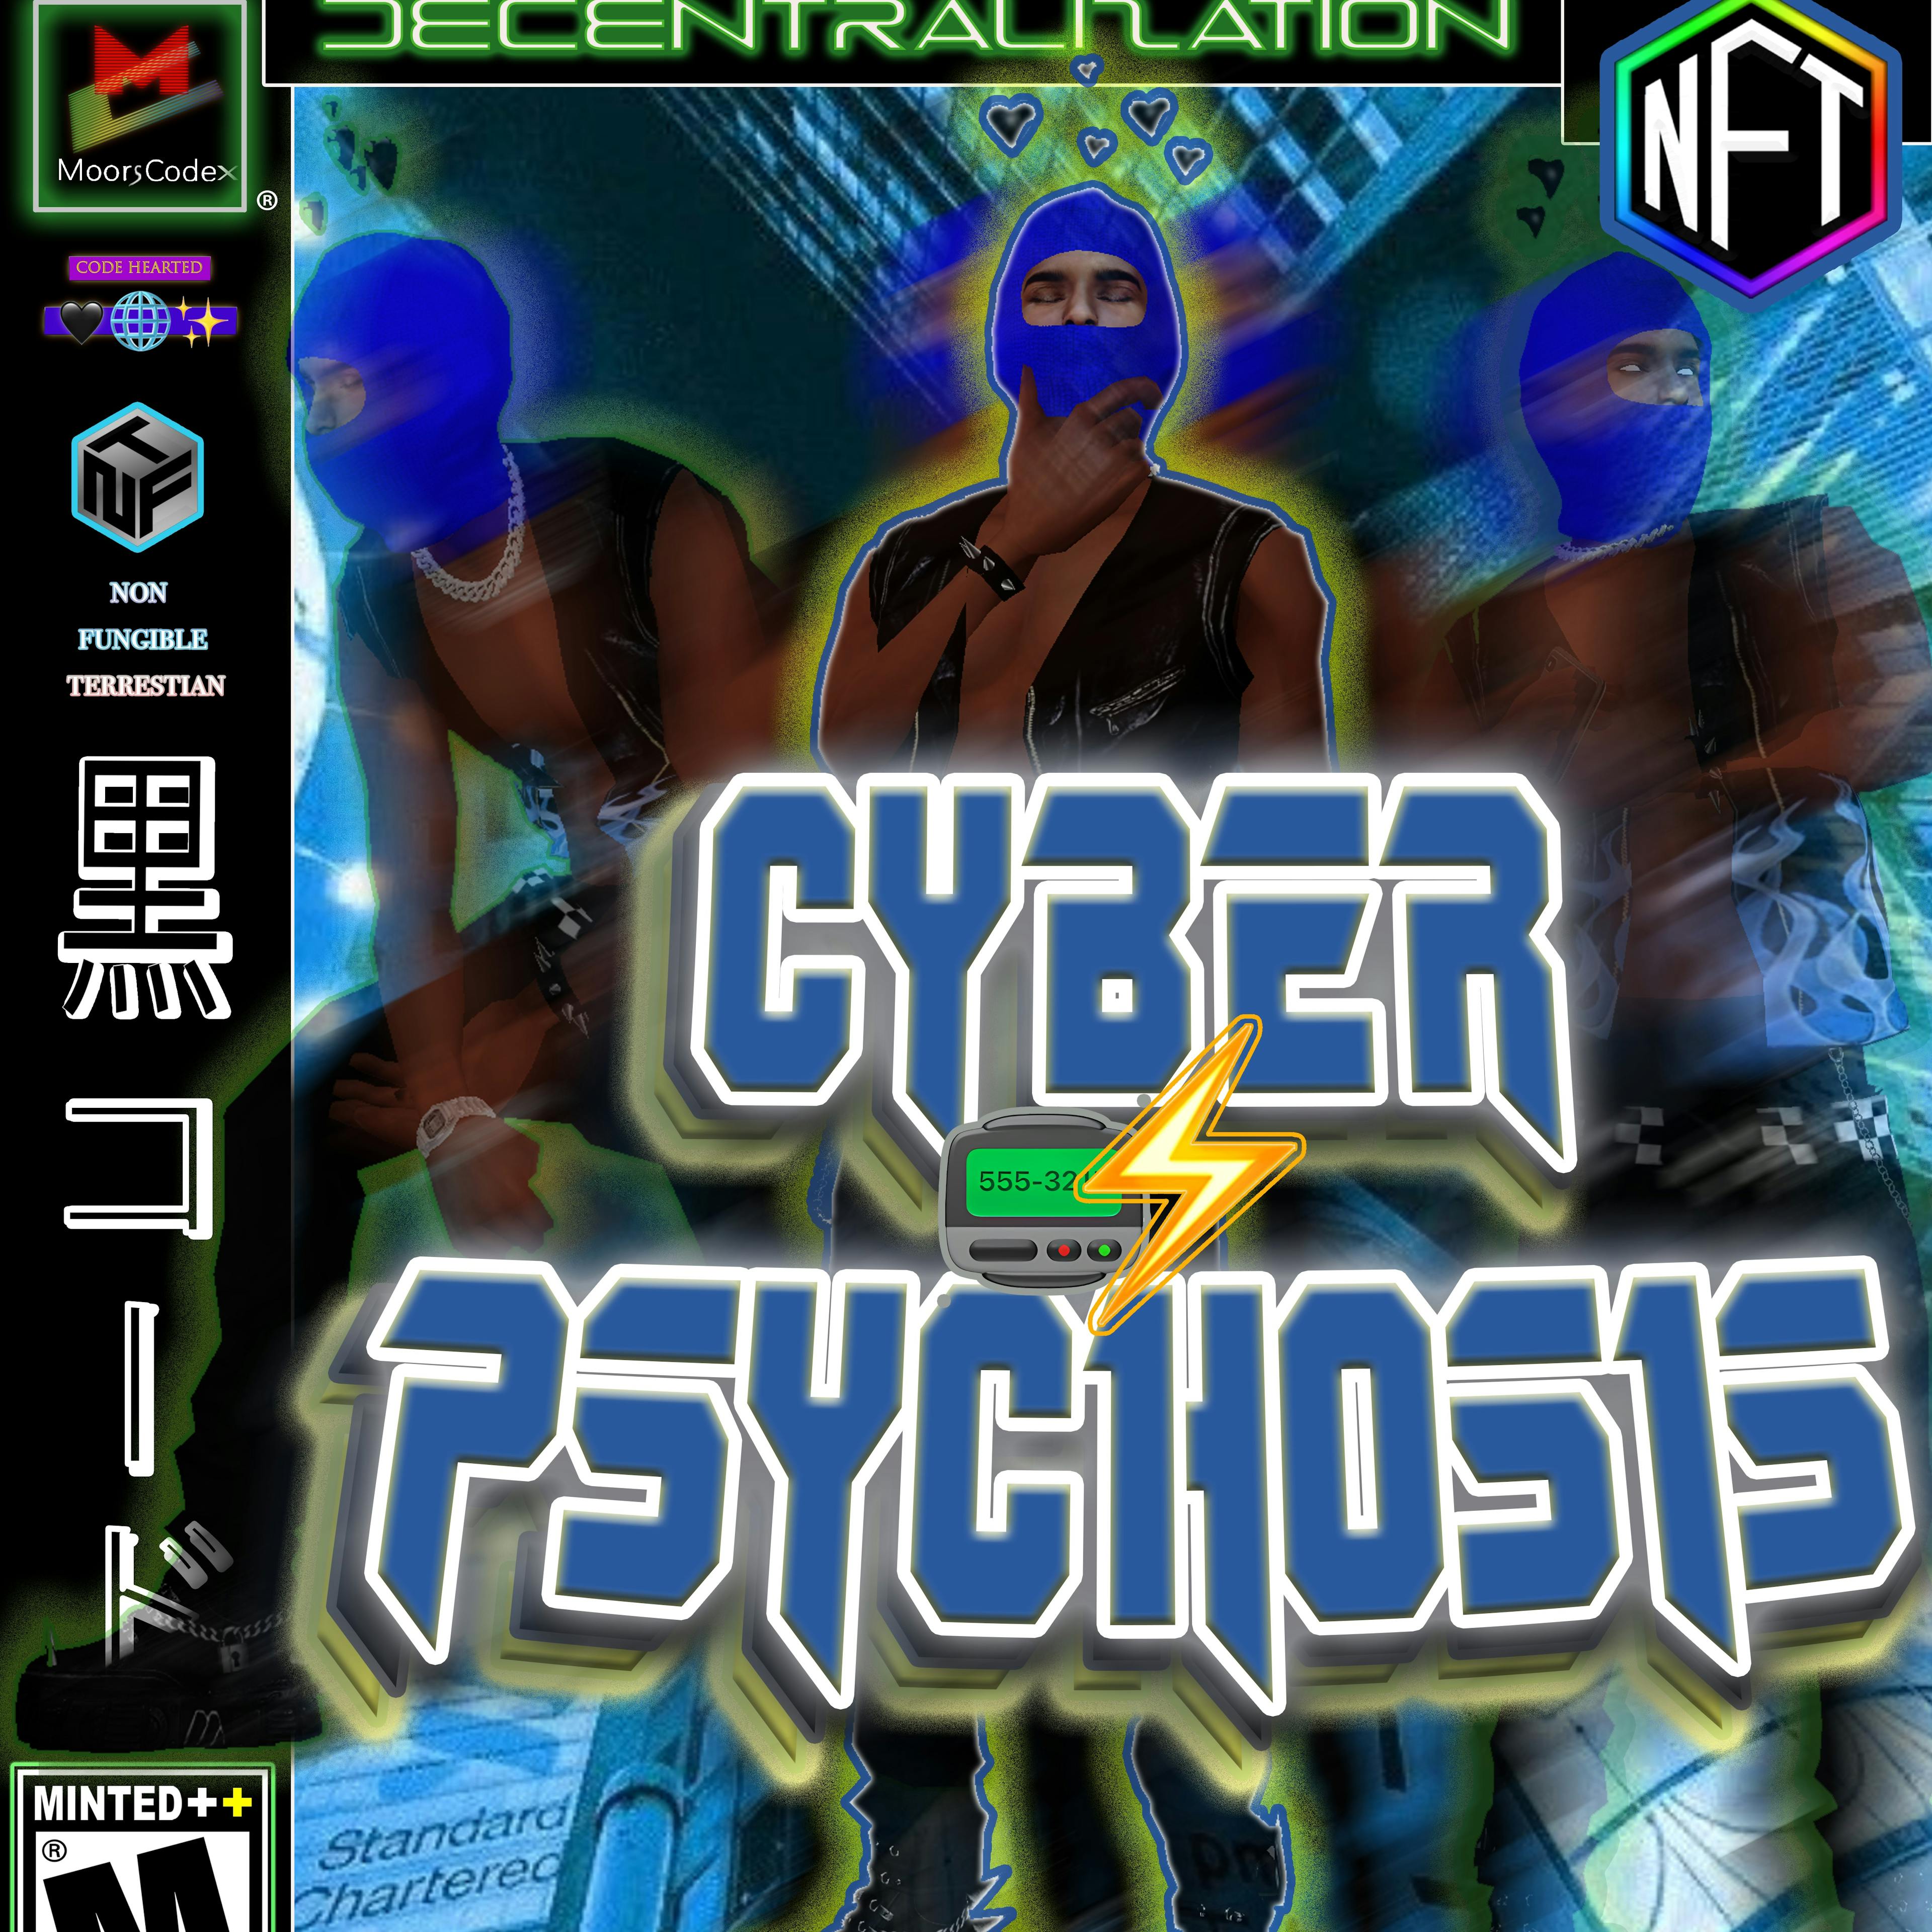 cyberPsychosis+!